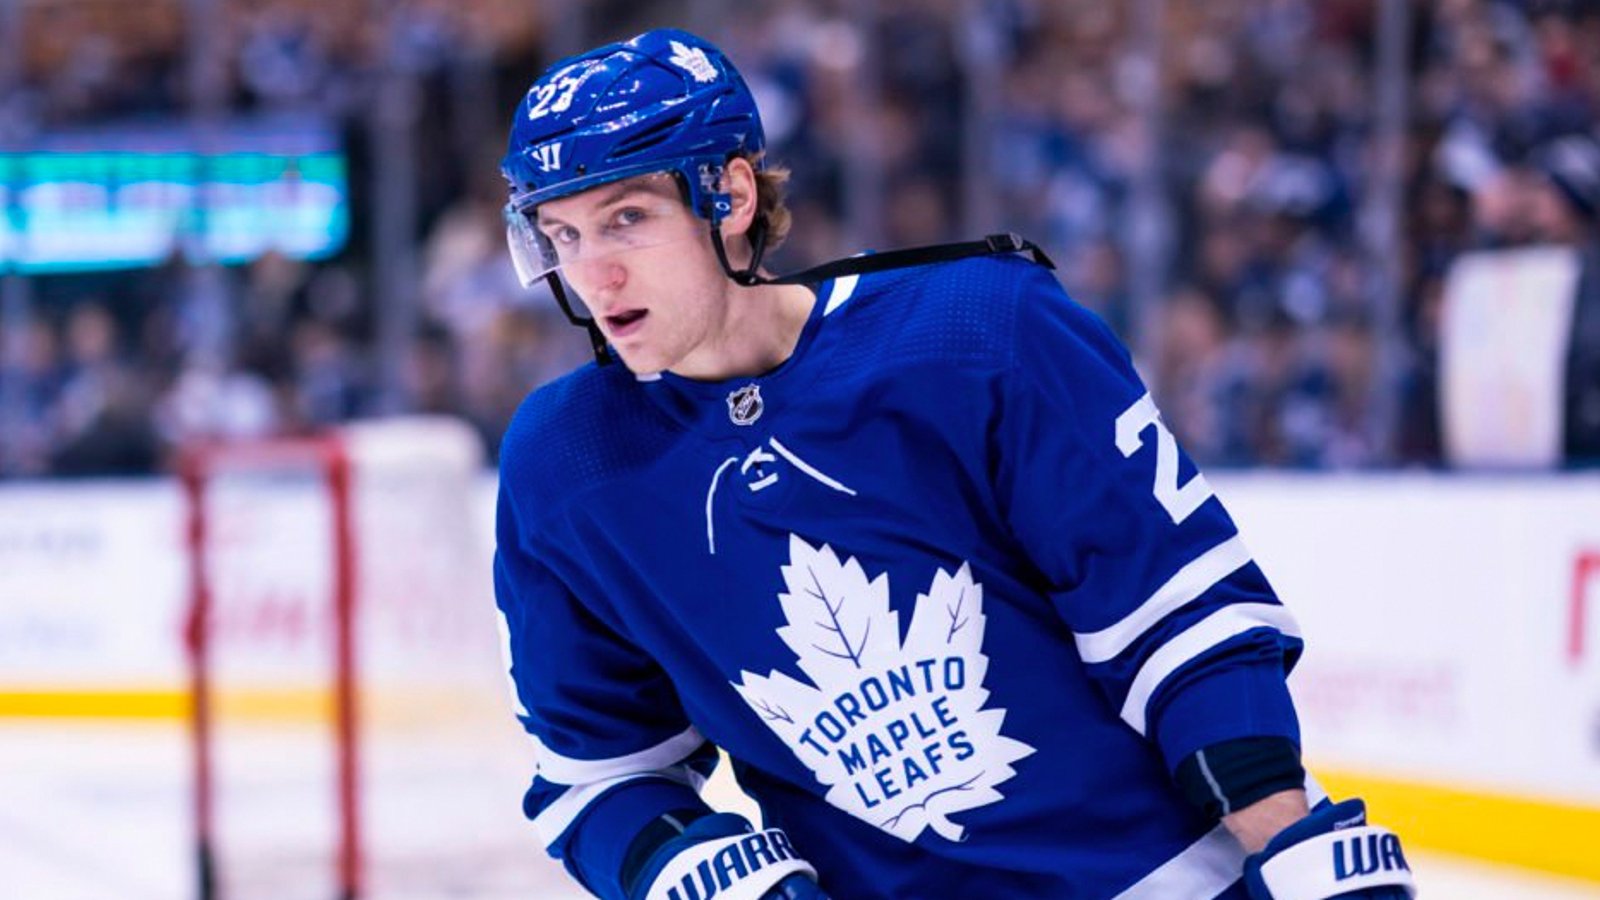 Dermott signs $3 million deal with Leafs